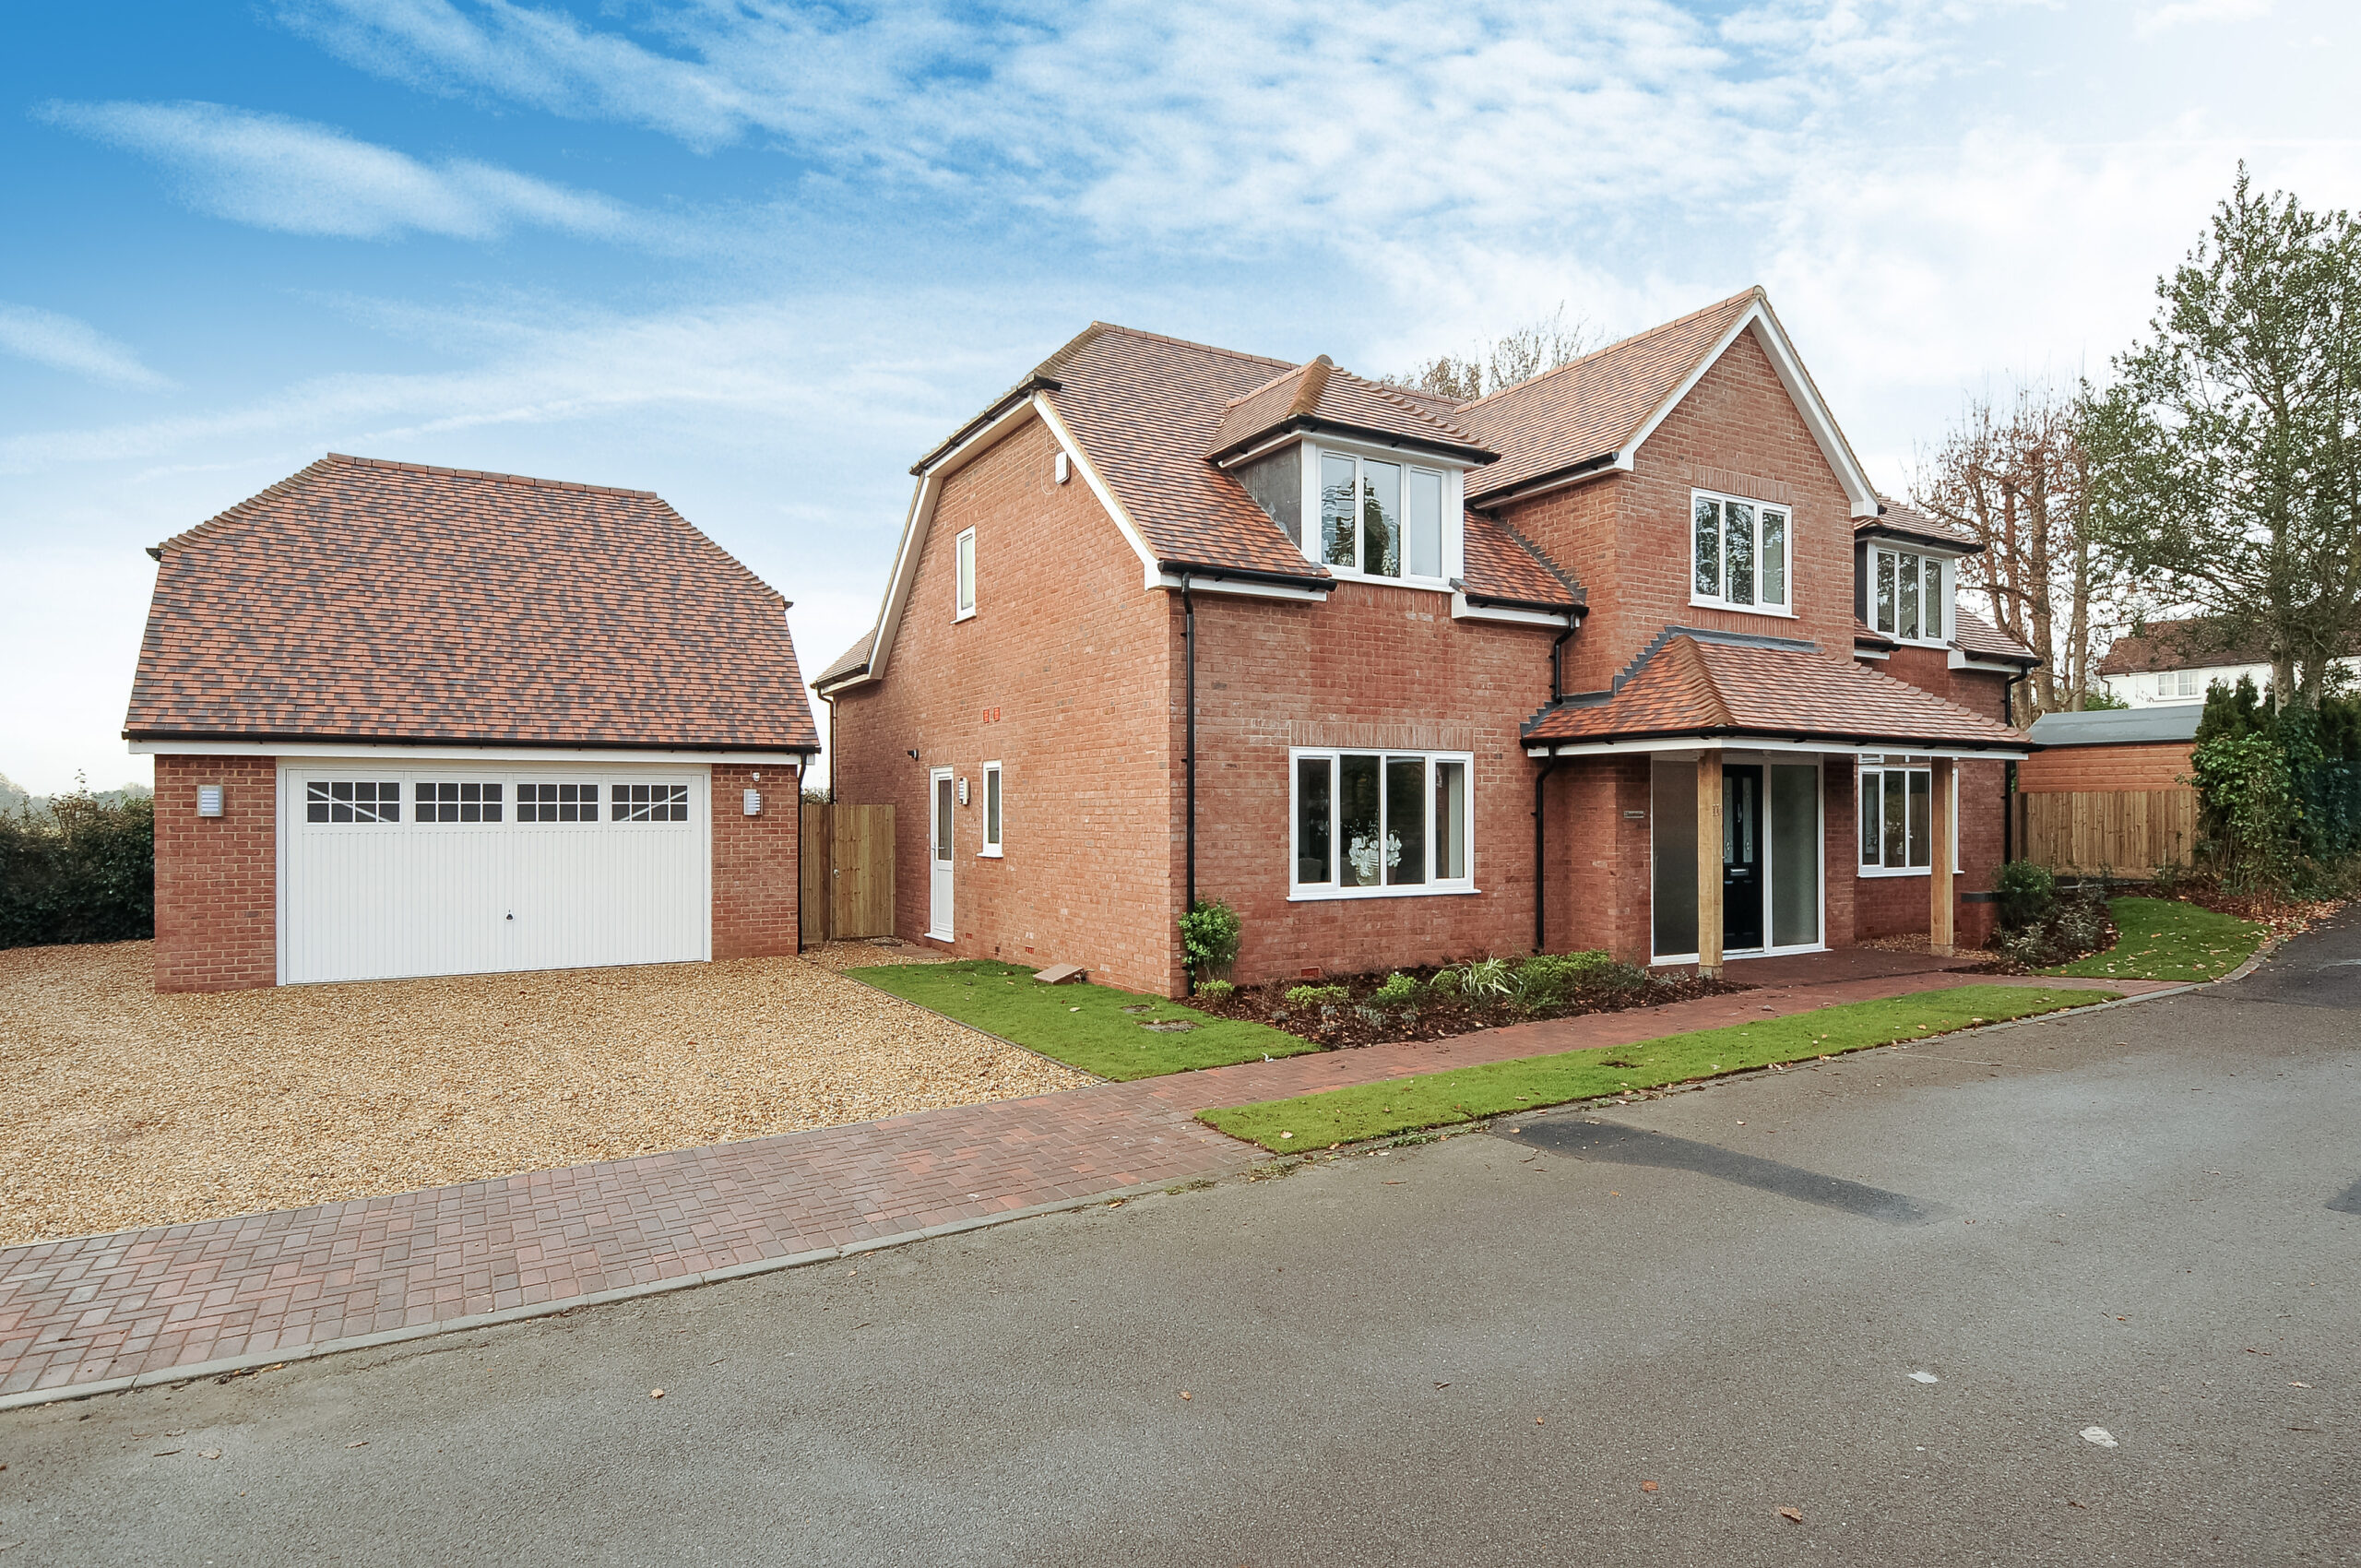 Southview – Executive 4/5 bedroom house, Horton Heath – Reserved